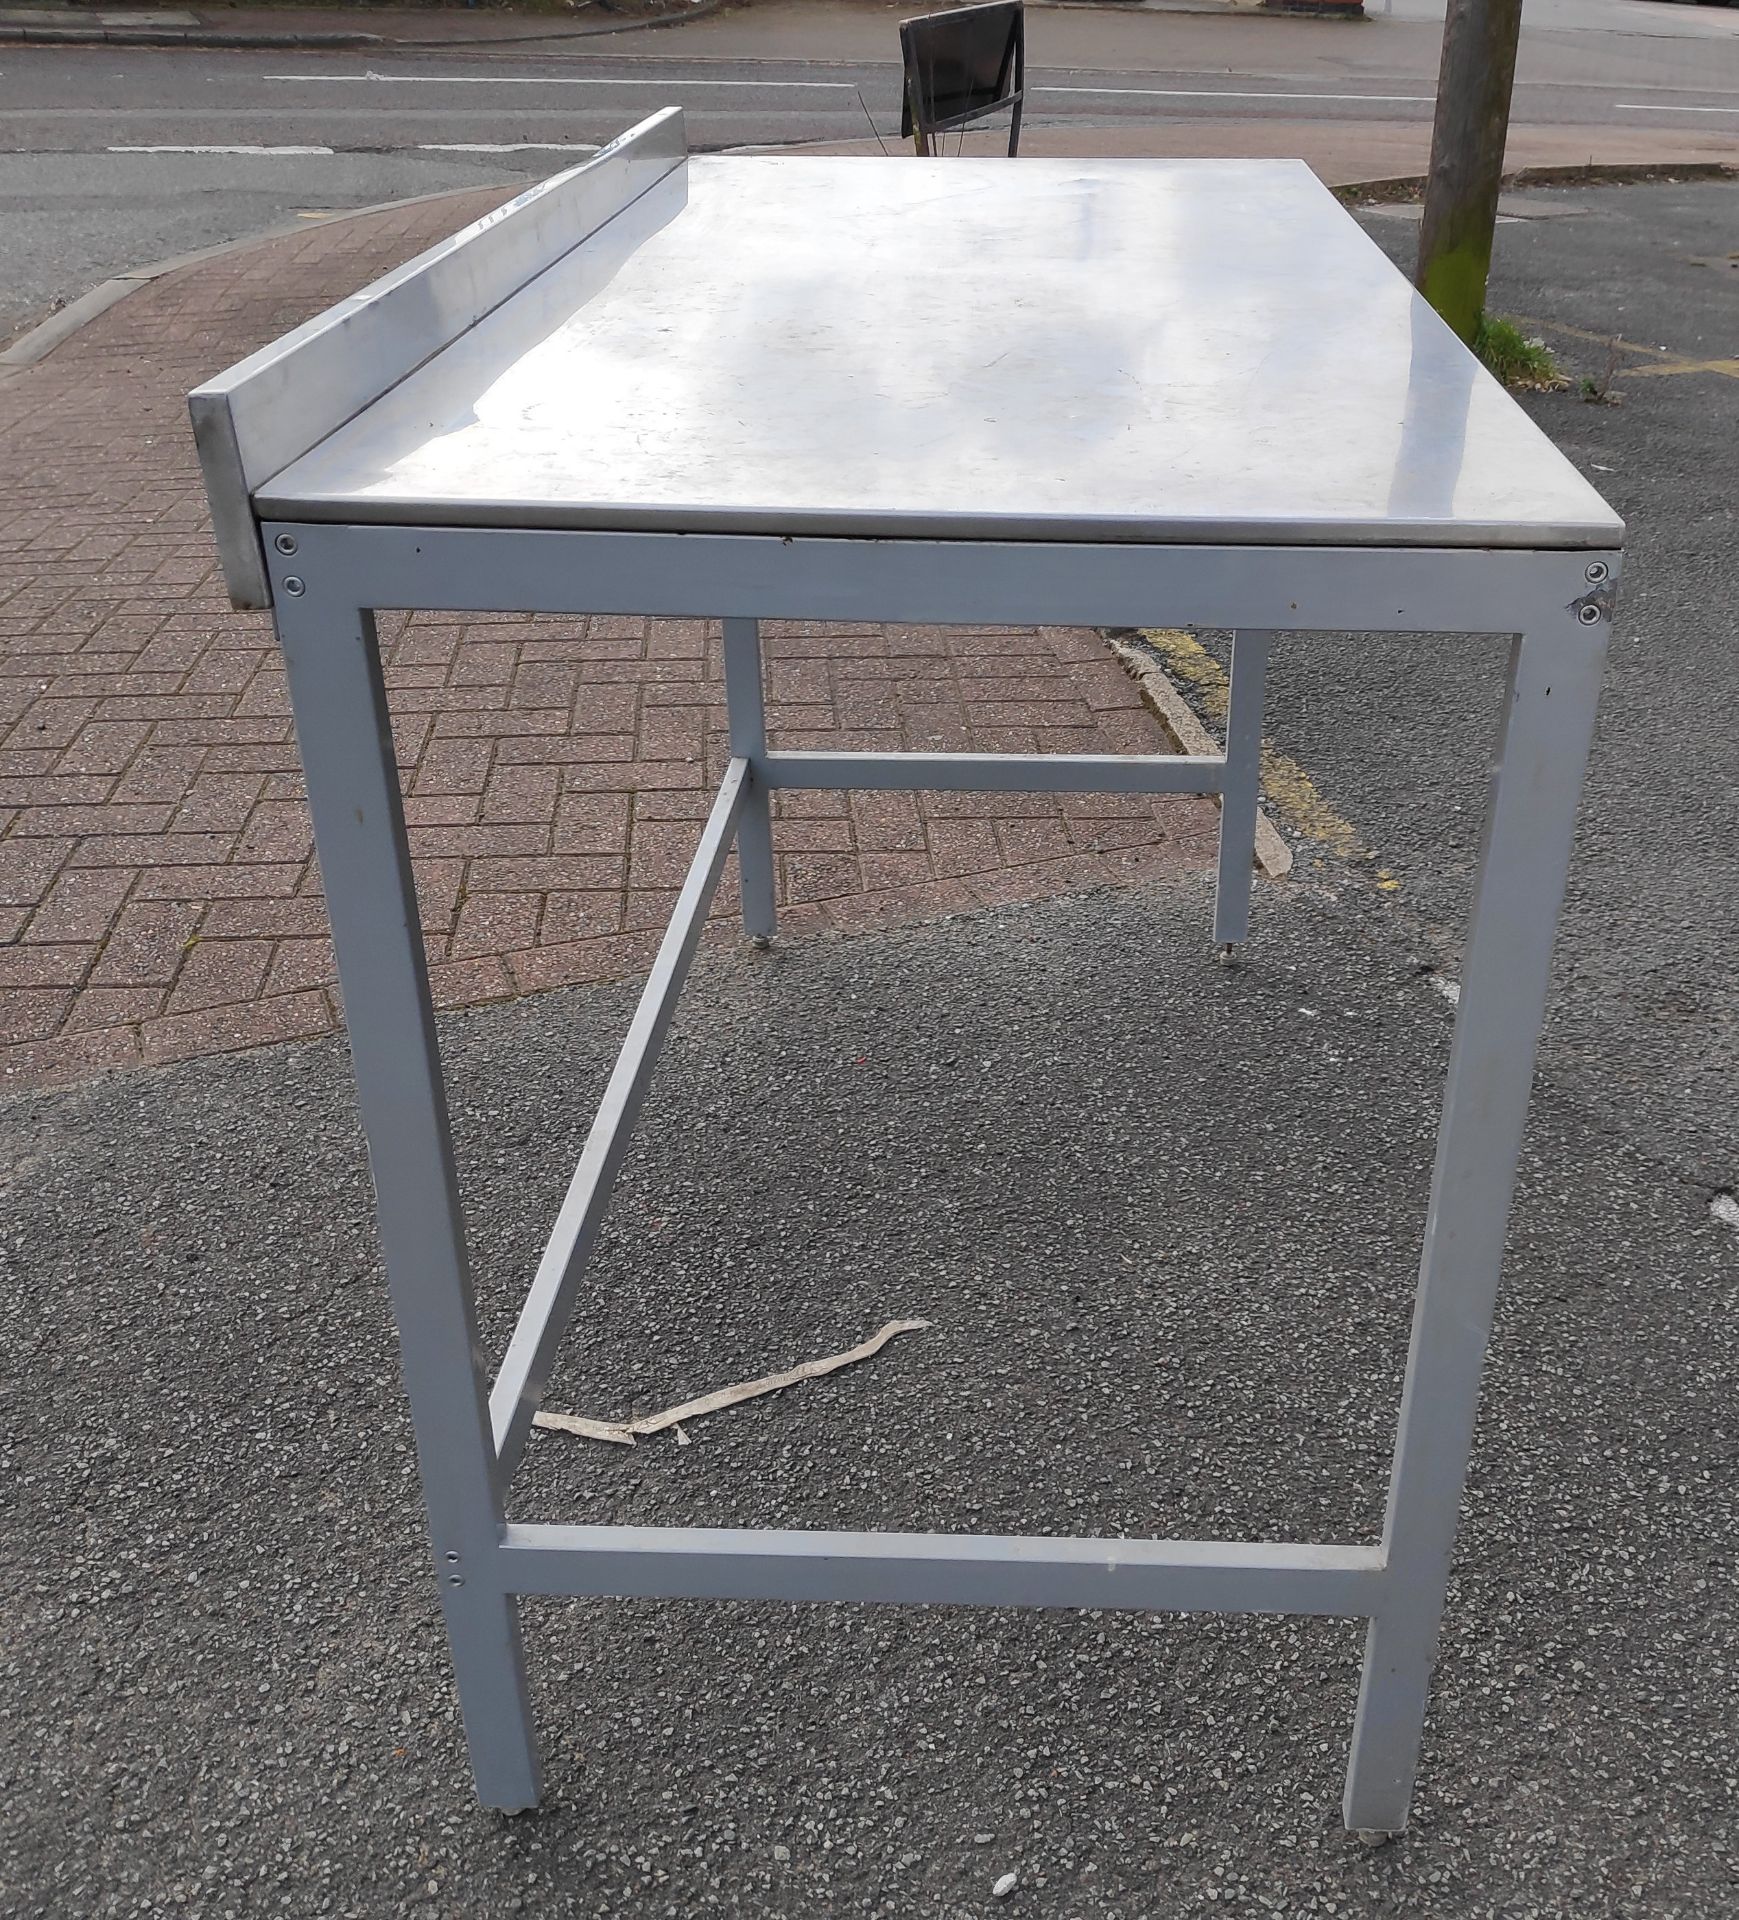 1 x Stainless Steel Prep Bench with Upstand - 126cm (L) x 64.5cm (D) x 95cm (H) - JMCS107 - CL723 - - Image 5 of 7